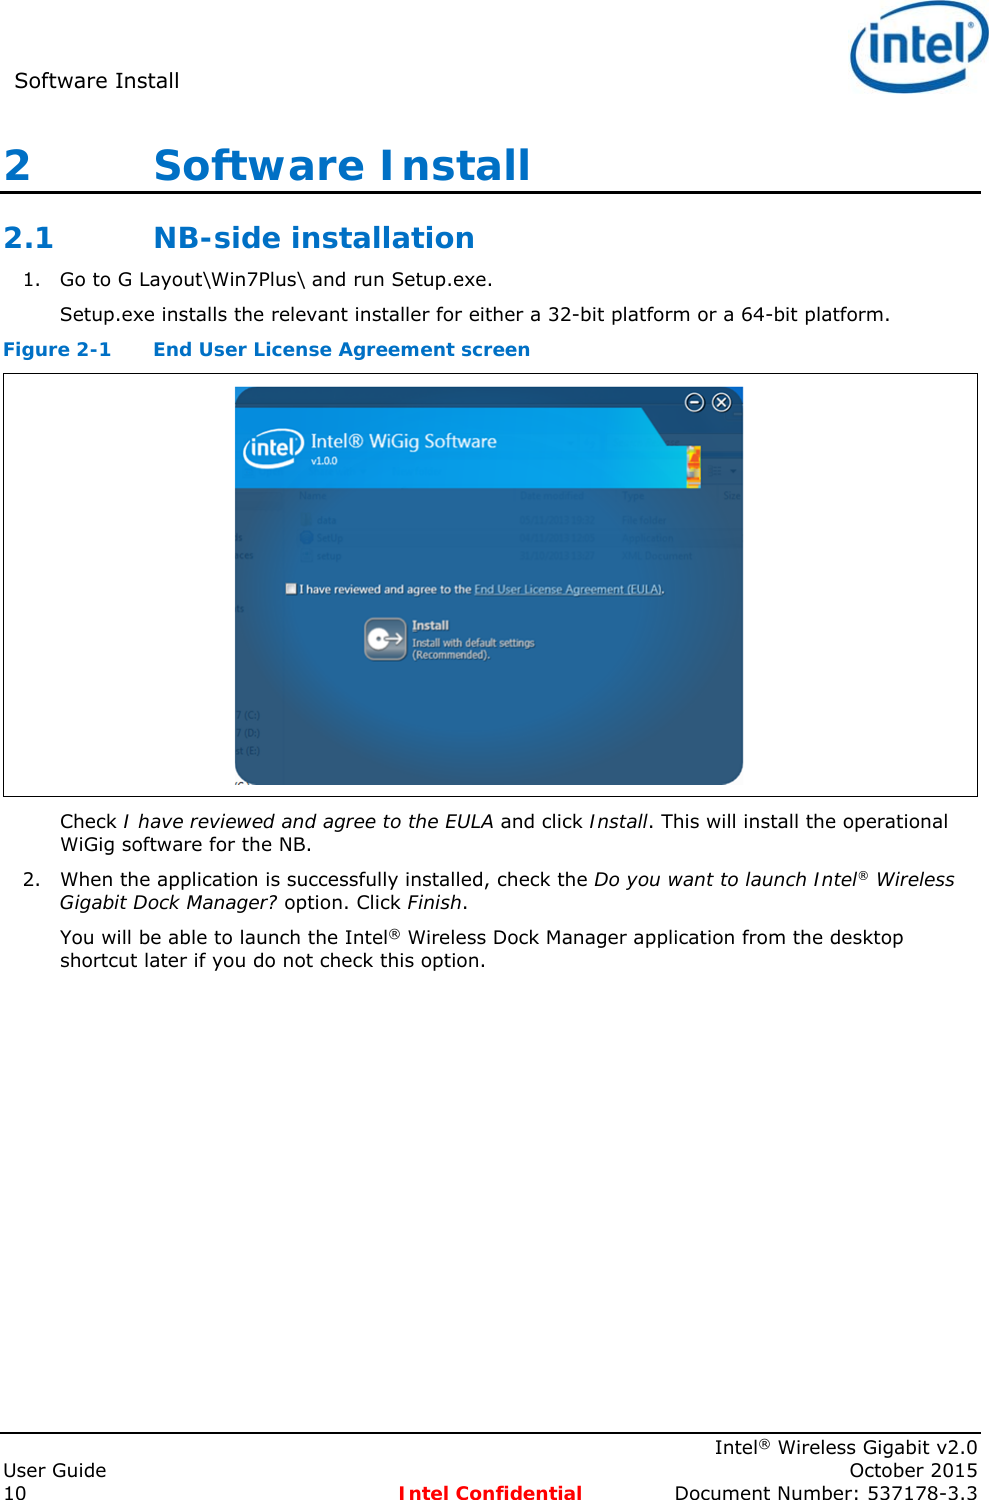 Software Install      Intel® Wireless Gigabit v2.0 User Guide    October 2015 10 Intel Confidential  Document Number: 537178-3.3 2   Software Install 2.1 NB-side installation 1. Go to G Layout\Win7Plus\ and run Setup.exe.  Setup.exe installs the relevant installer for either a 32-bit platform or a 64-bit platform. Figure 2-1  End User License Agreement screen  Check I have reviewed and agree to the EULA and click Install. This will install the operational WiGig software for the NB. 2. When the application is successfully installed, check the Do you want to launch Intel® Wireless Gigabit Dock Manager? option. Click Finish. You will be able to launch the Intel® Wireless Dock Manager application from the desktop shortcut later if you do not check this option. 